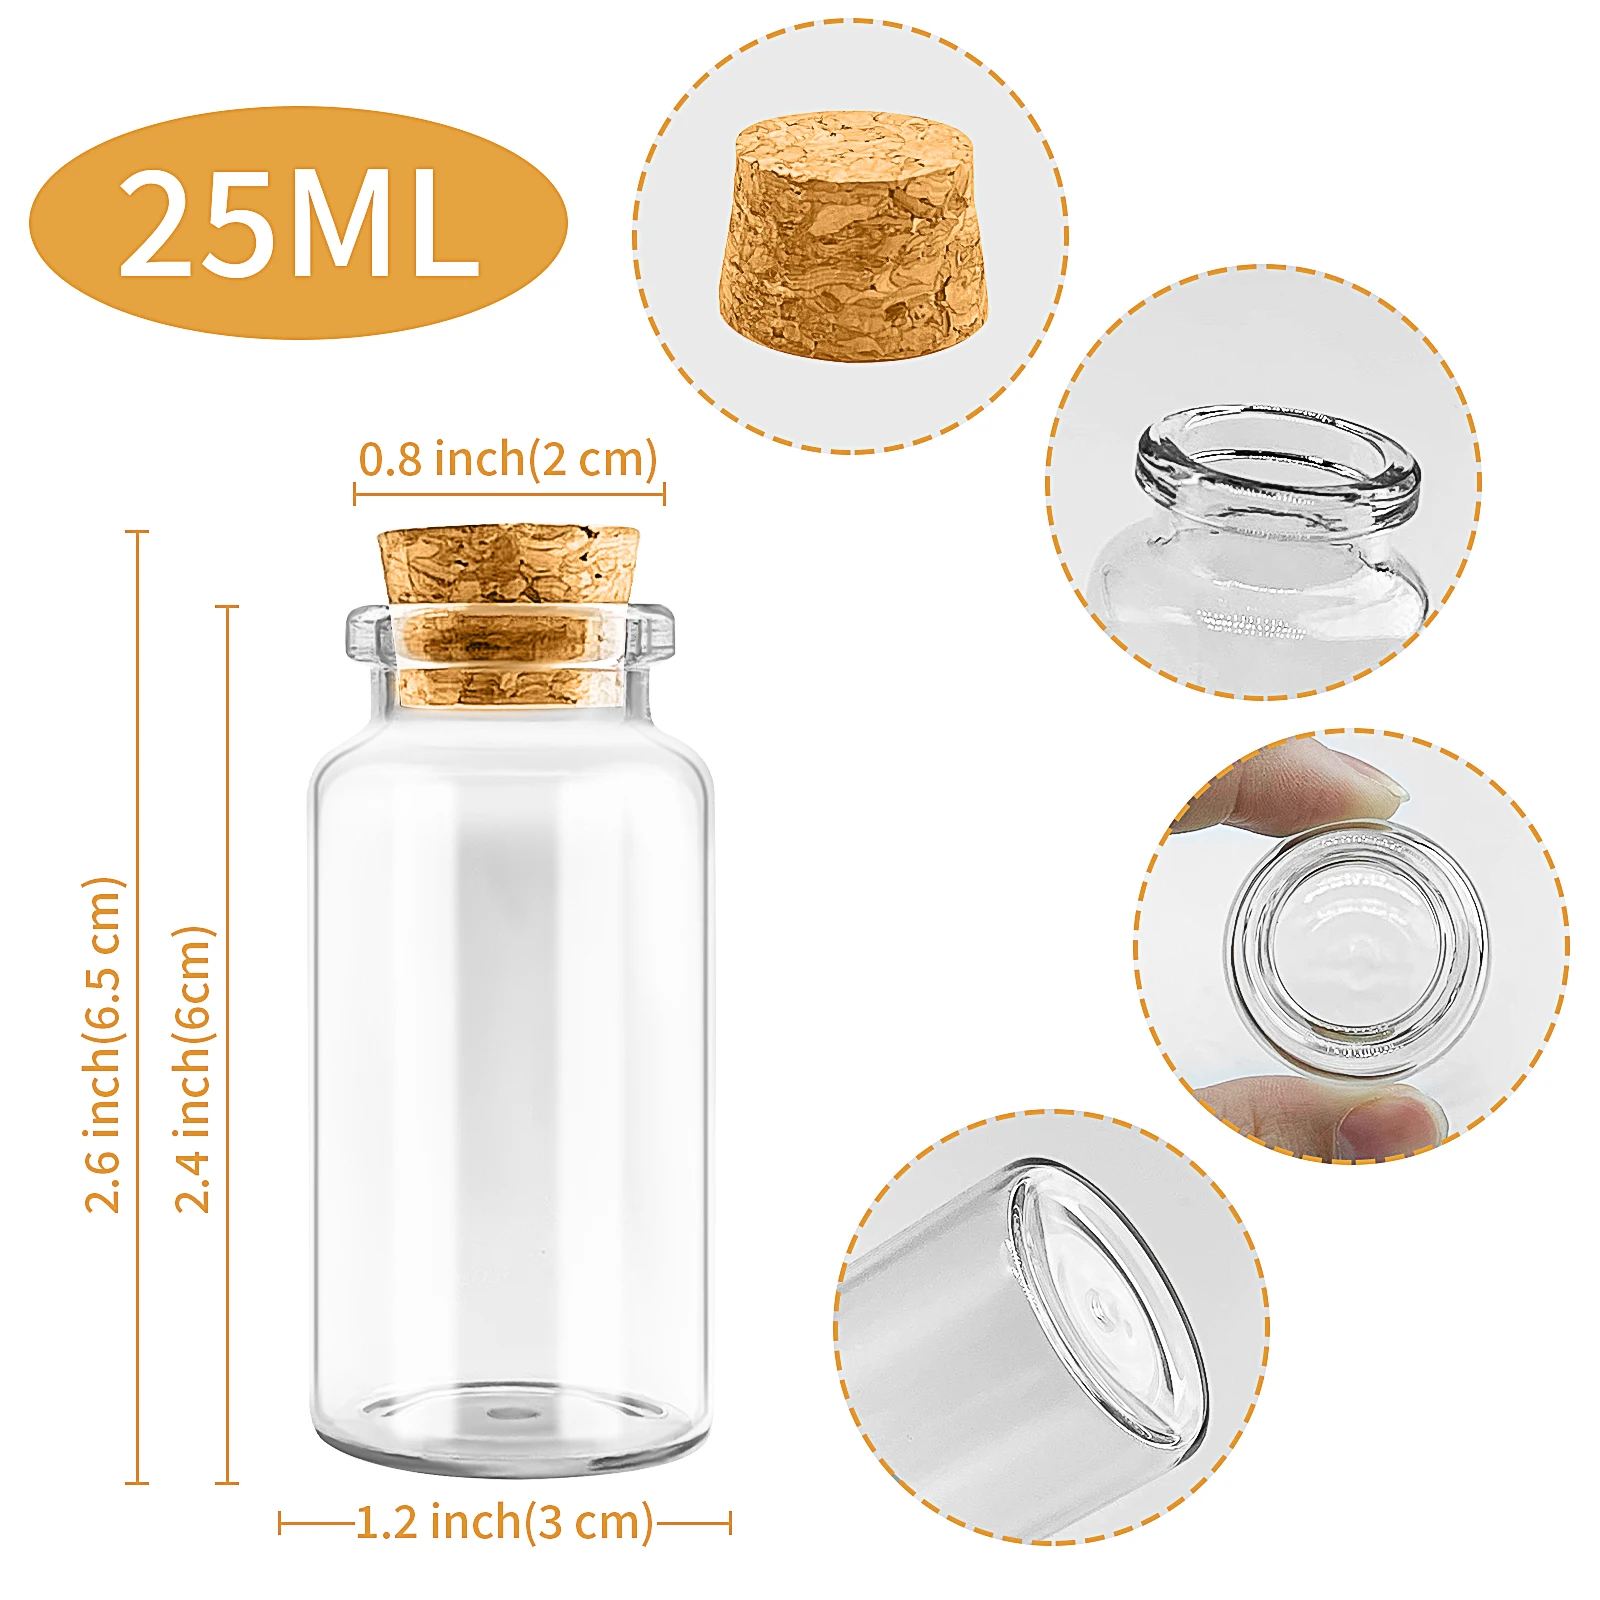 12/48PCS DIY Mini Glass Bottle with Cork Stopper Clear Small Jars Vials Wish Bottles Message Bottle Wedding Party Gift 25ML images - 6